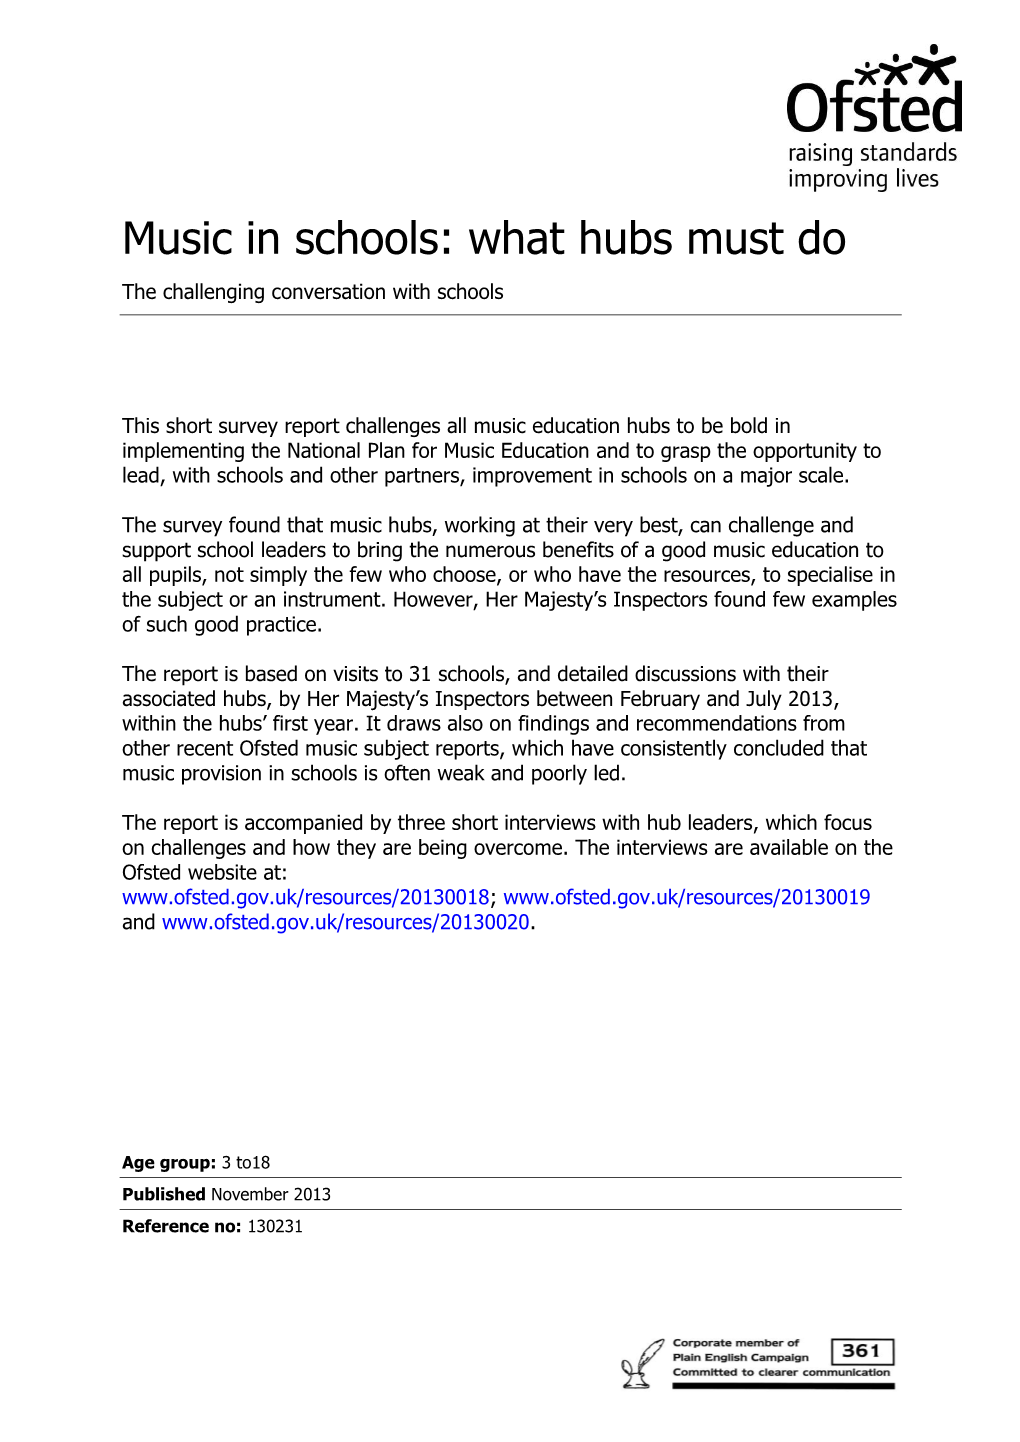 Music in Schools: What Hubs Must Do the Challenging Conversation with Schools